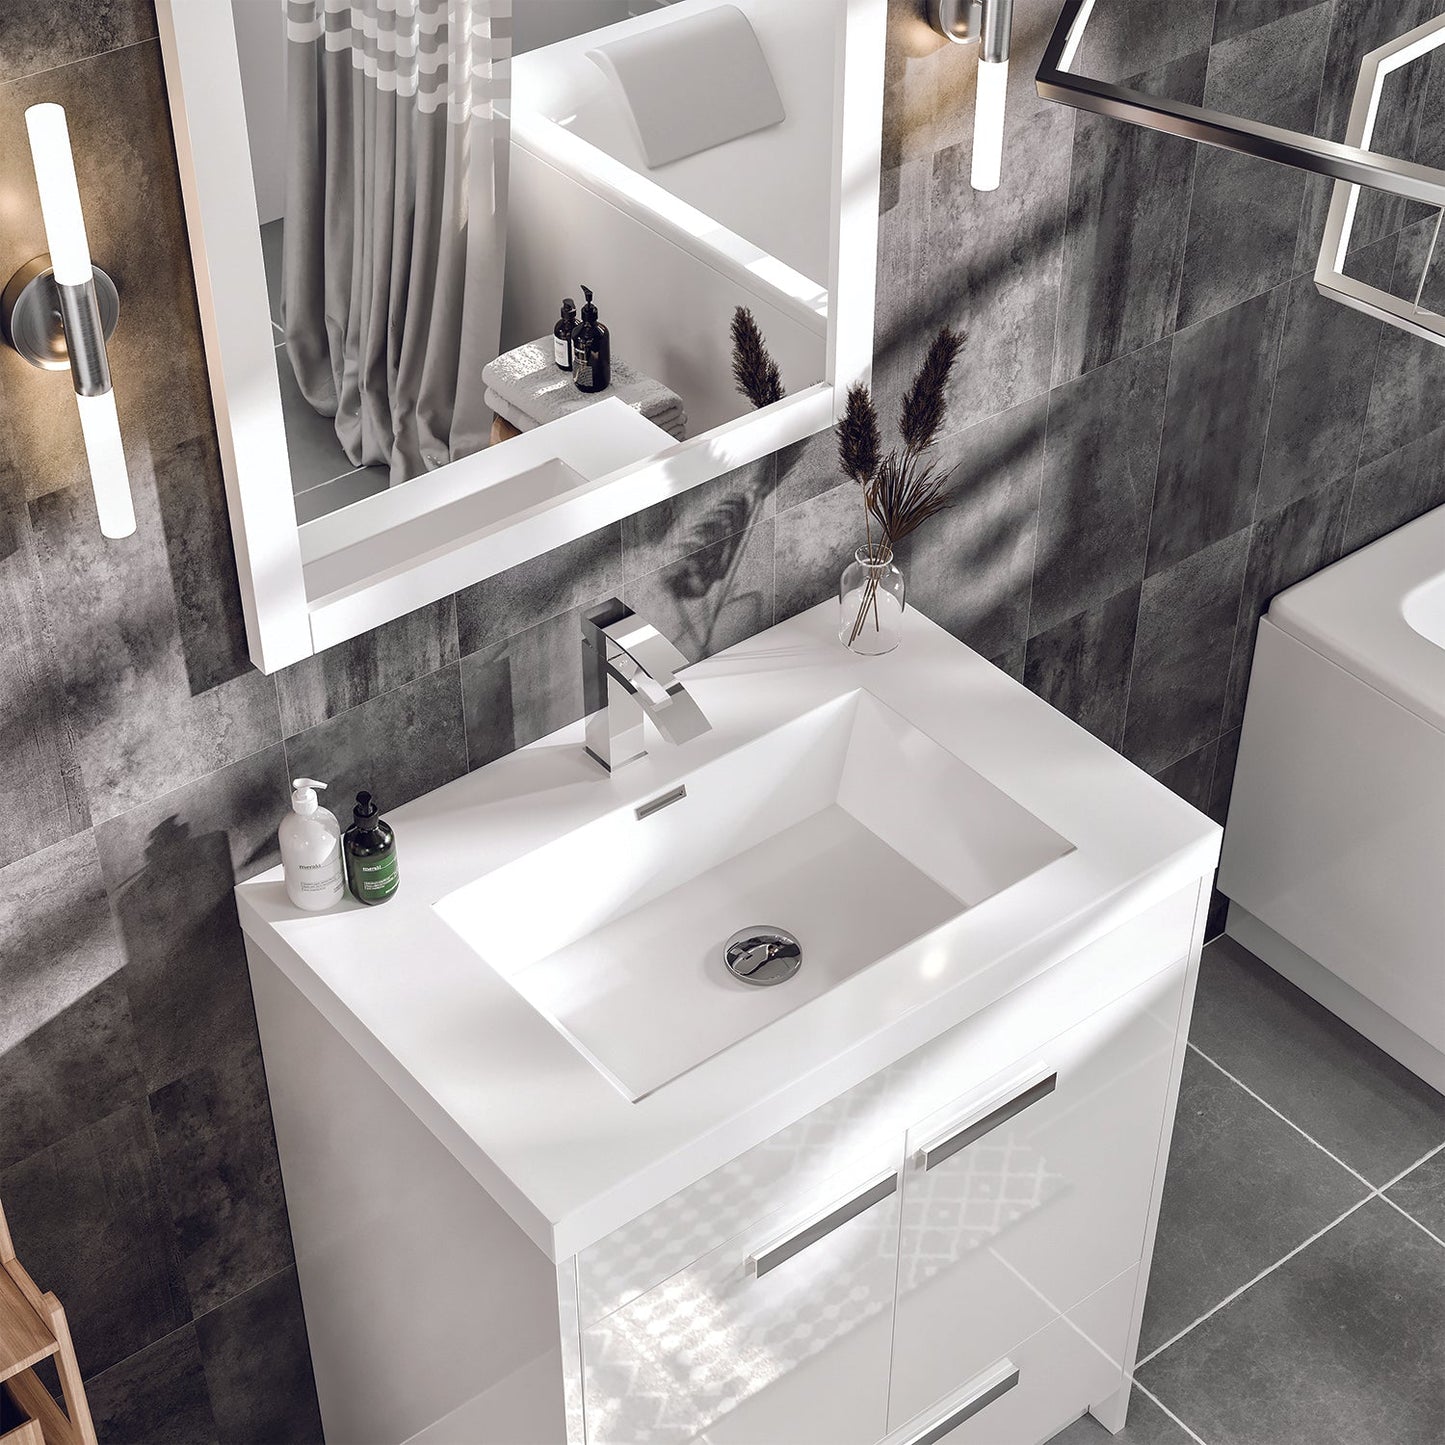 Lugano 24"W x 19"D White Bathroom Vanity with Acrylic Countertop and Integrated Sink